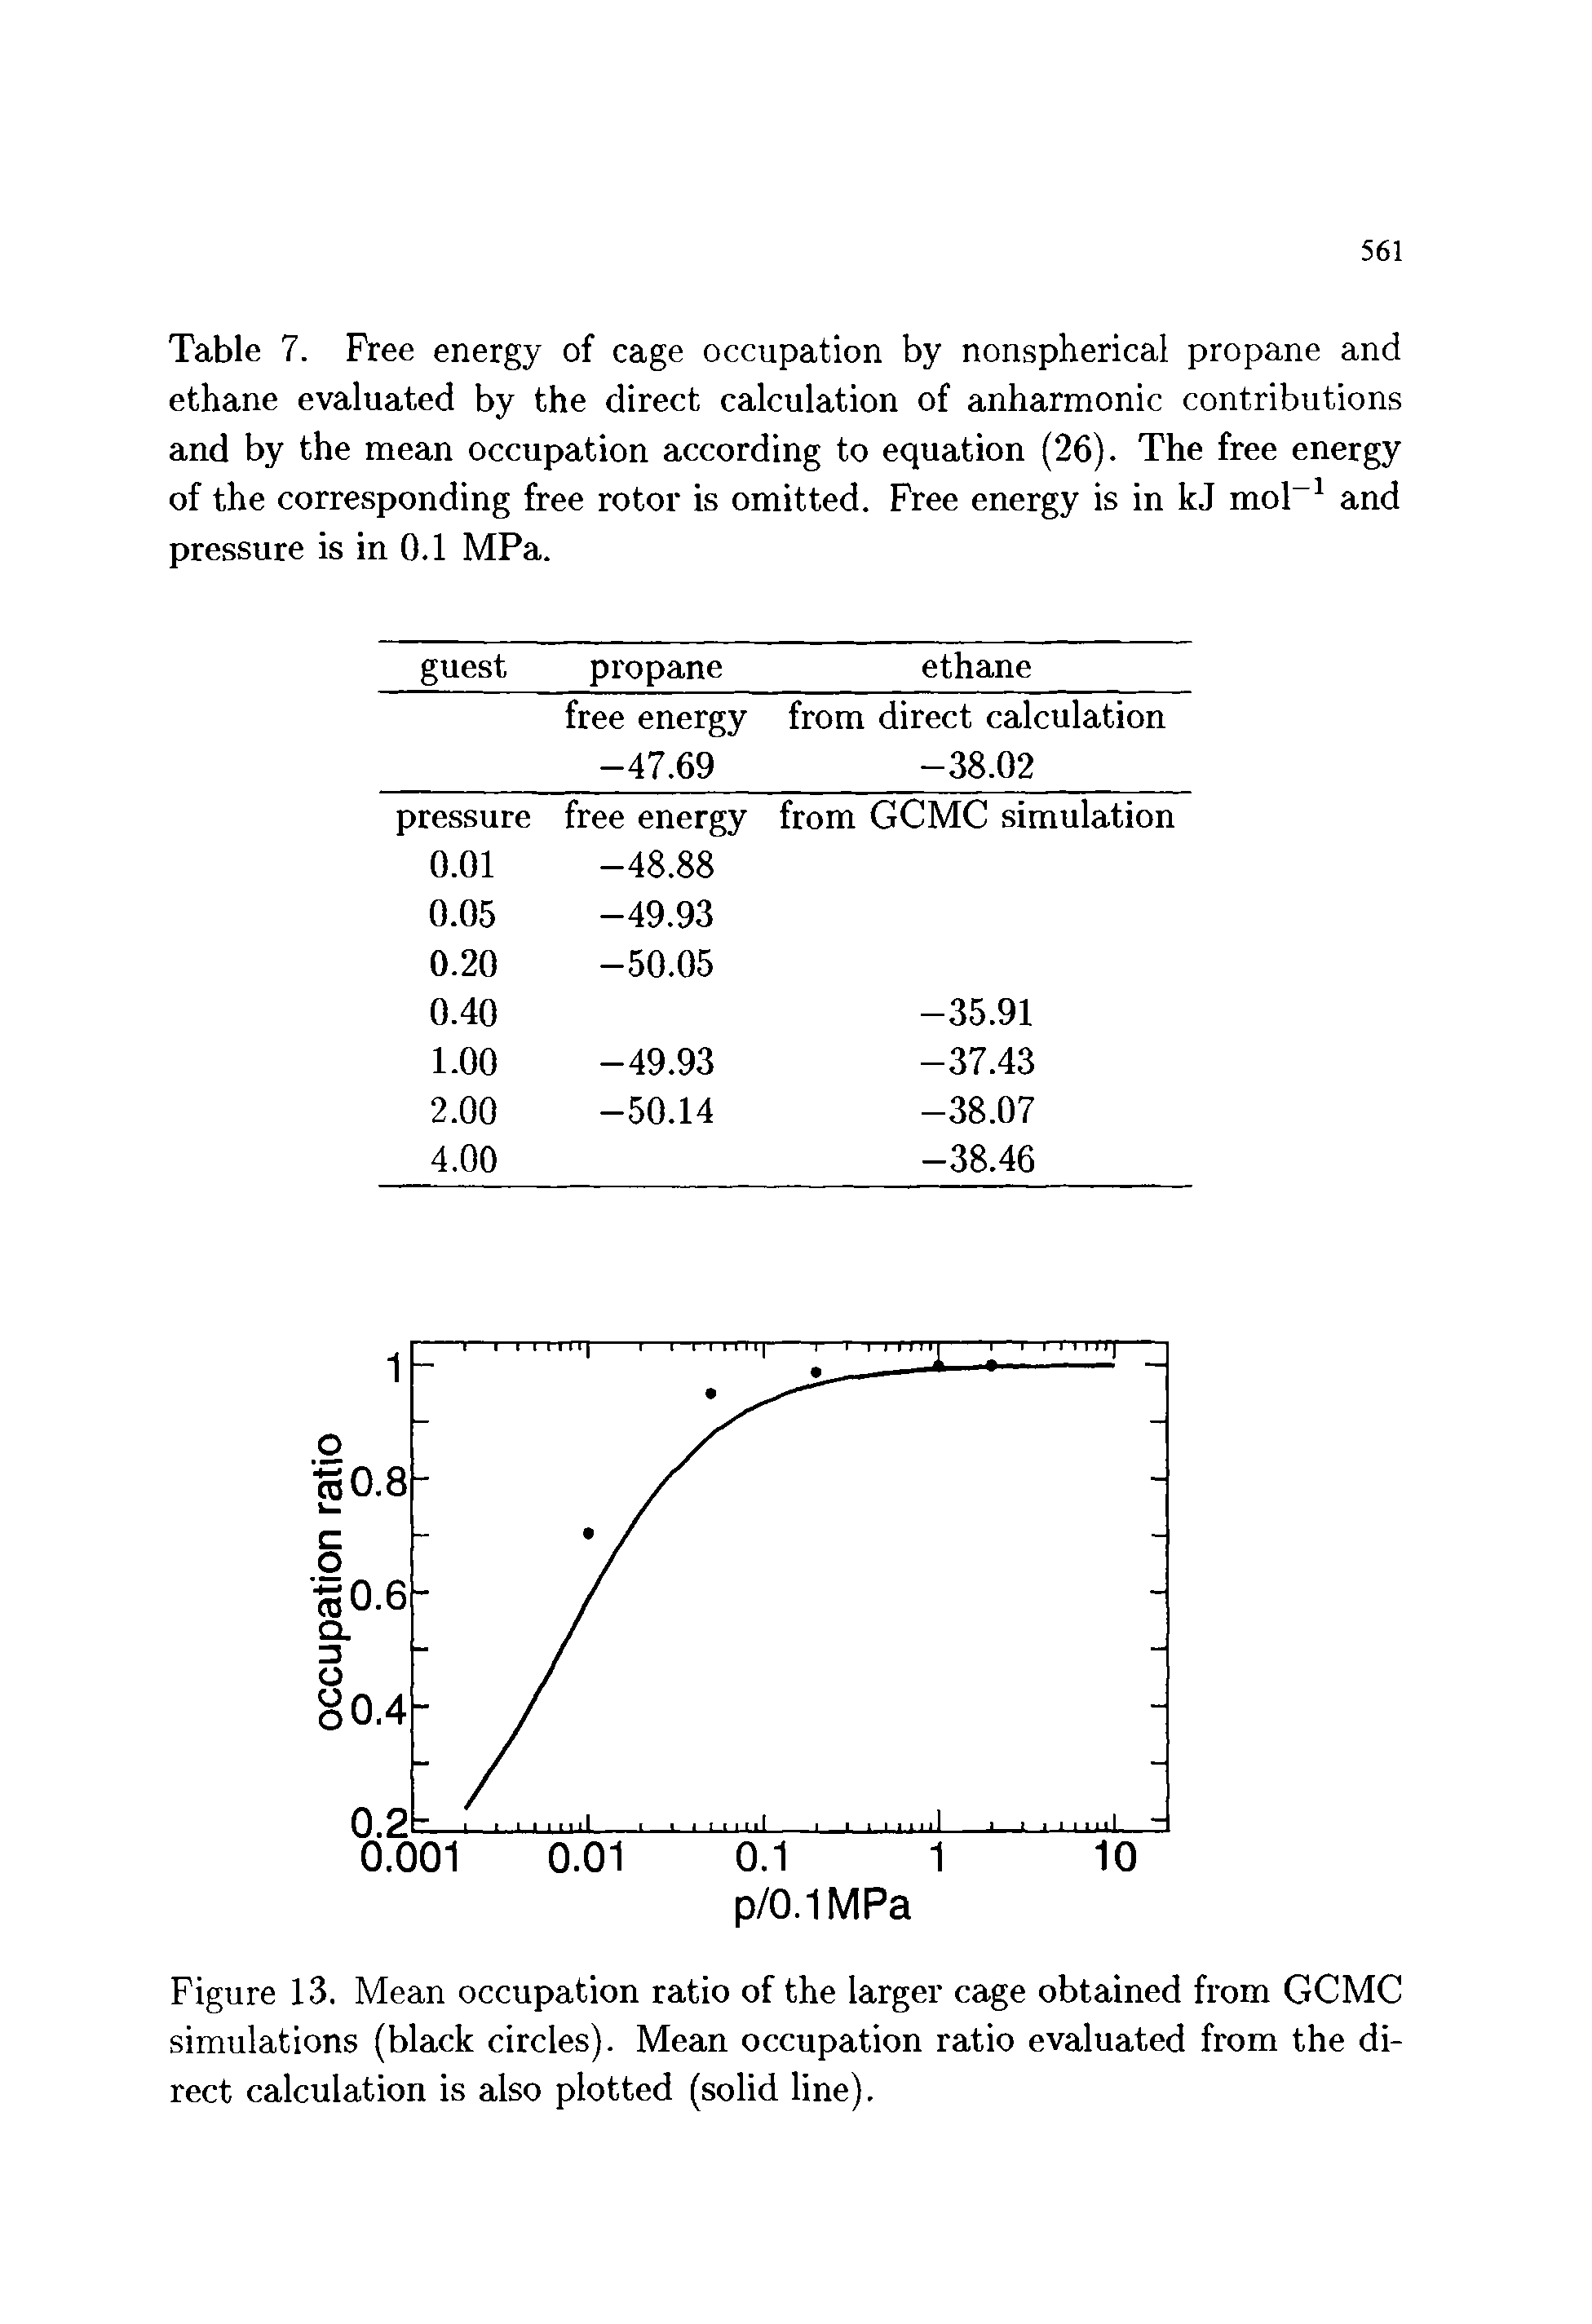 Table 7. Free energy of cage occupation by nonspherical propane and ethane evaluated by the direct calculation of anharmonic contributions and by the mean occupation according to equation (26). The free energy of the corresponding free rotor is omitted. Free energy is in kJ mol and pressure is in 0.1 MPa.